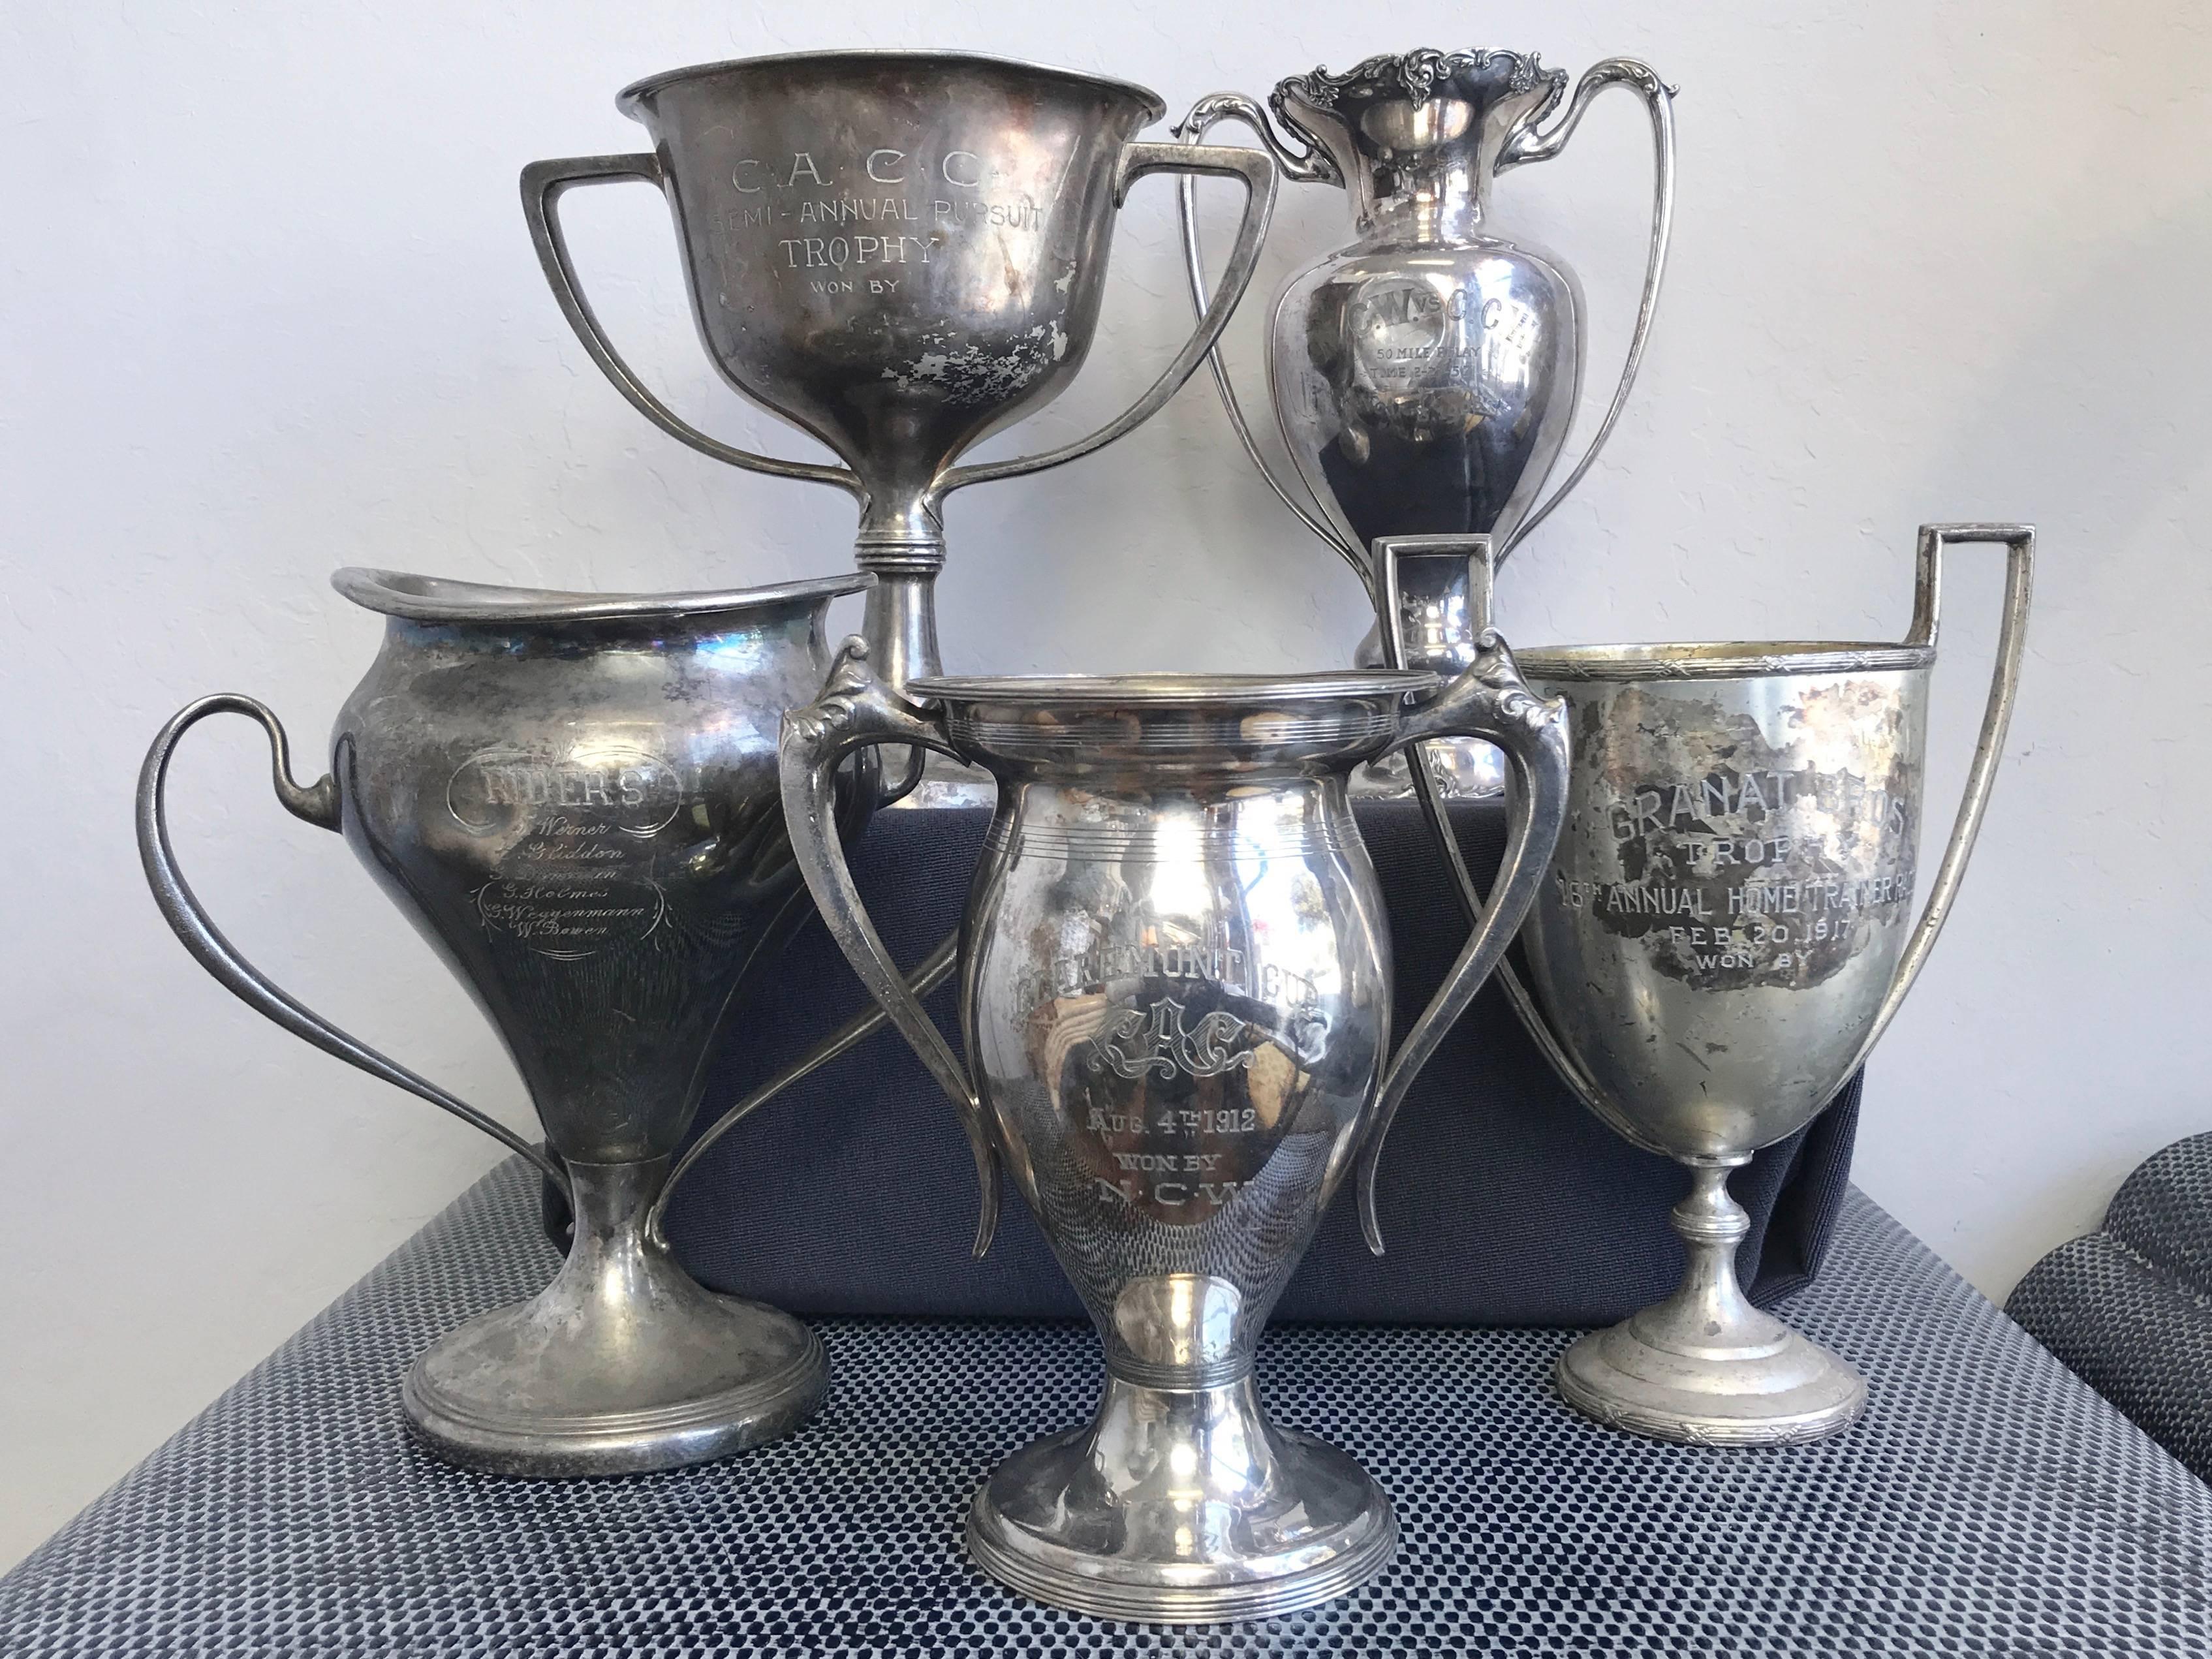 An historically important grouping of five Bay Area, California, silverplate cycling club trophies dating from 1908 to 1917.

A handsome collection of bicycle racing memorabilia, and a testament to San Francisco’s and its nearby cities’ indomitable